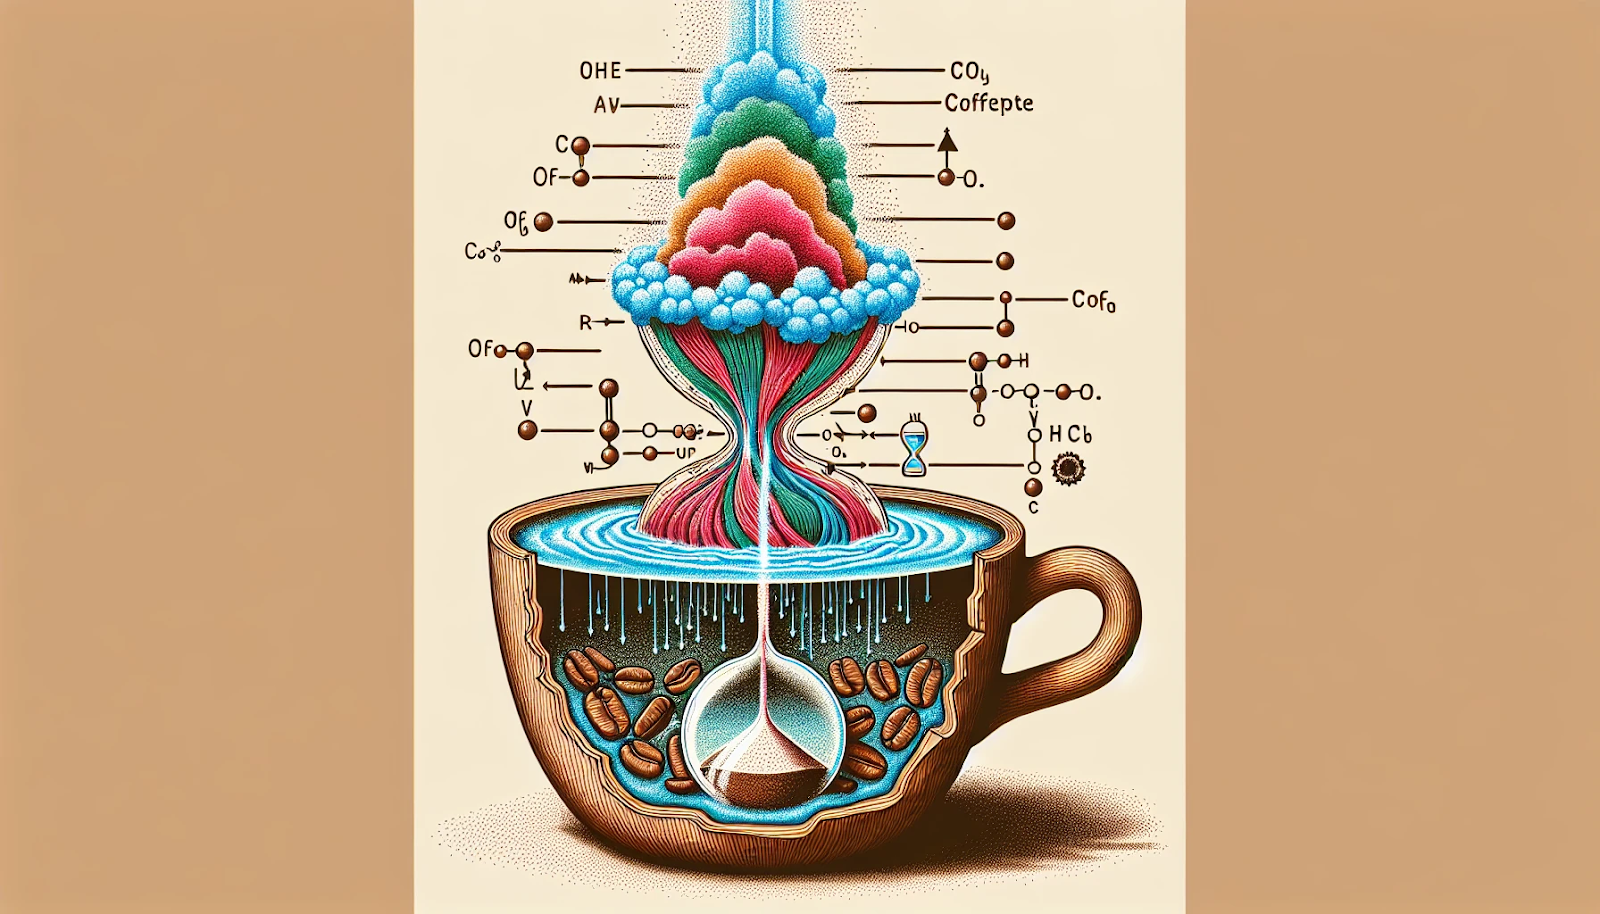 A scientific illustration depicting the extraction process in coffee brewing, emphasizing the importance of longer brewing times